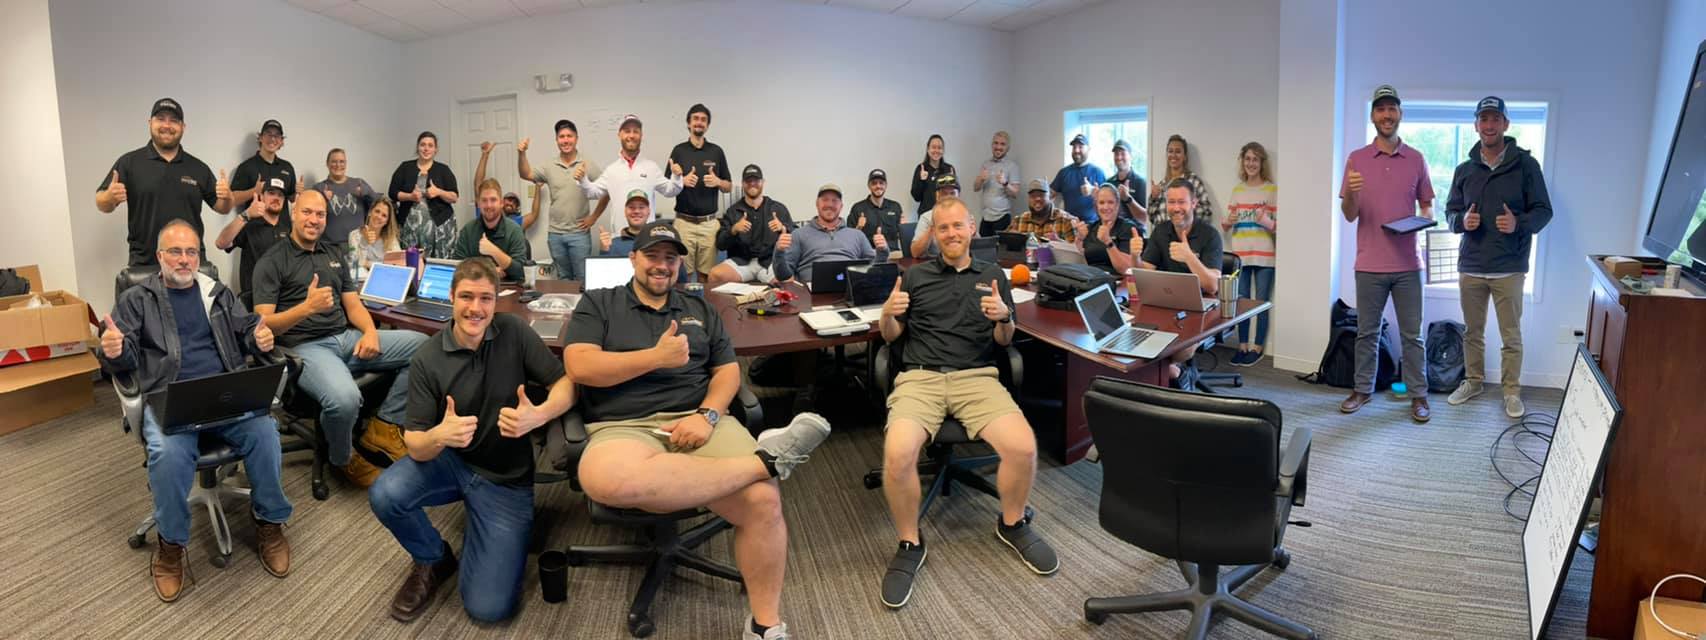 A group of employees giving thumbs up for a group picture in an office in Dover, NH.